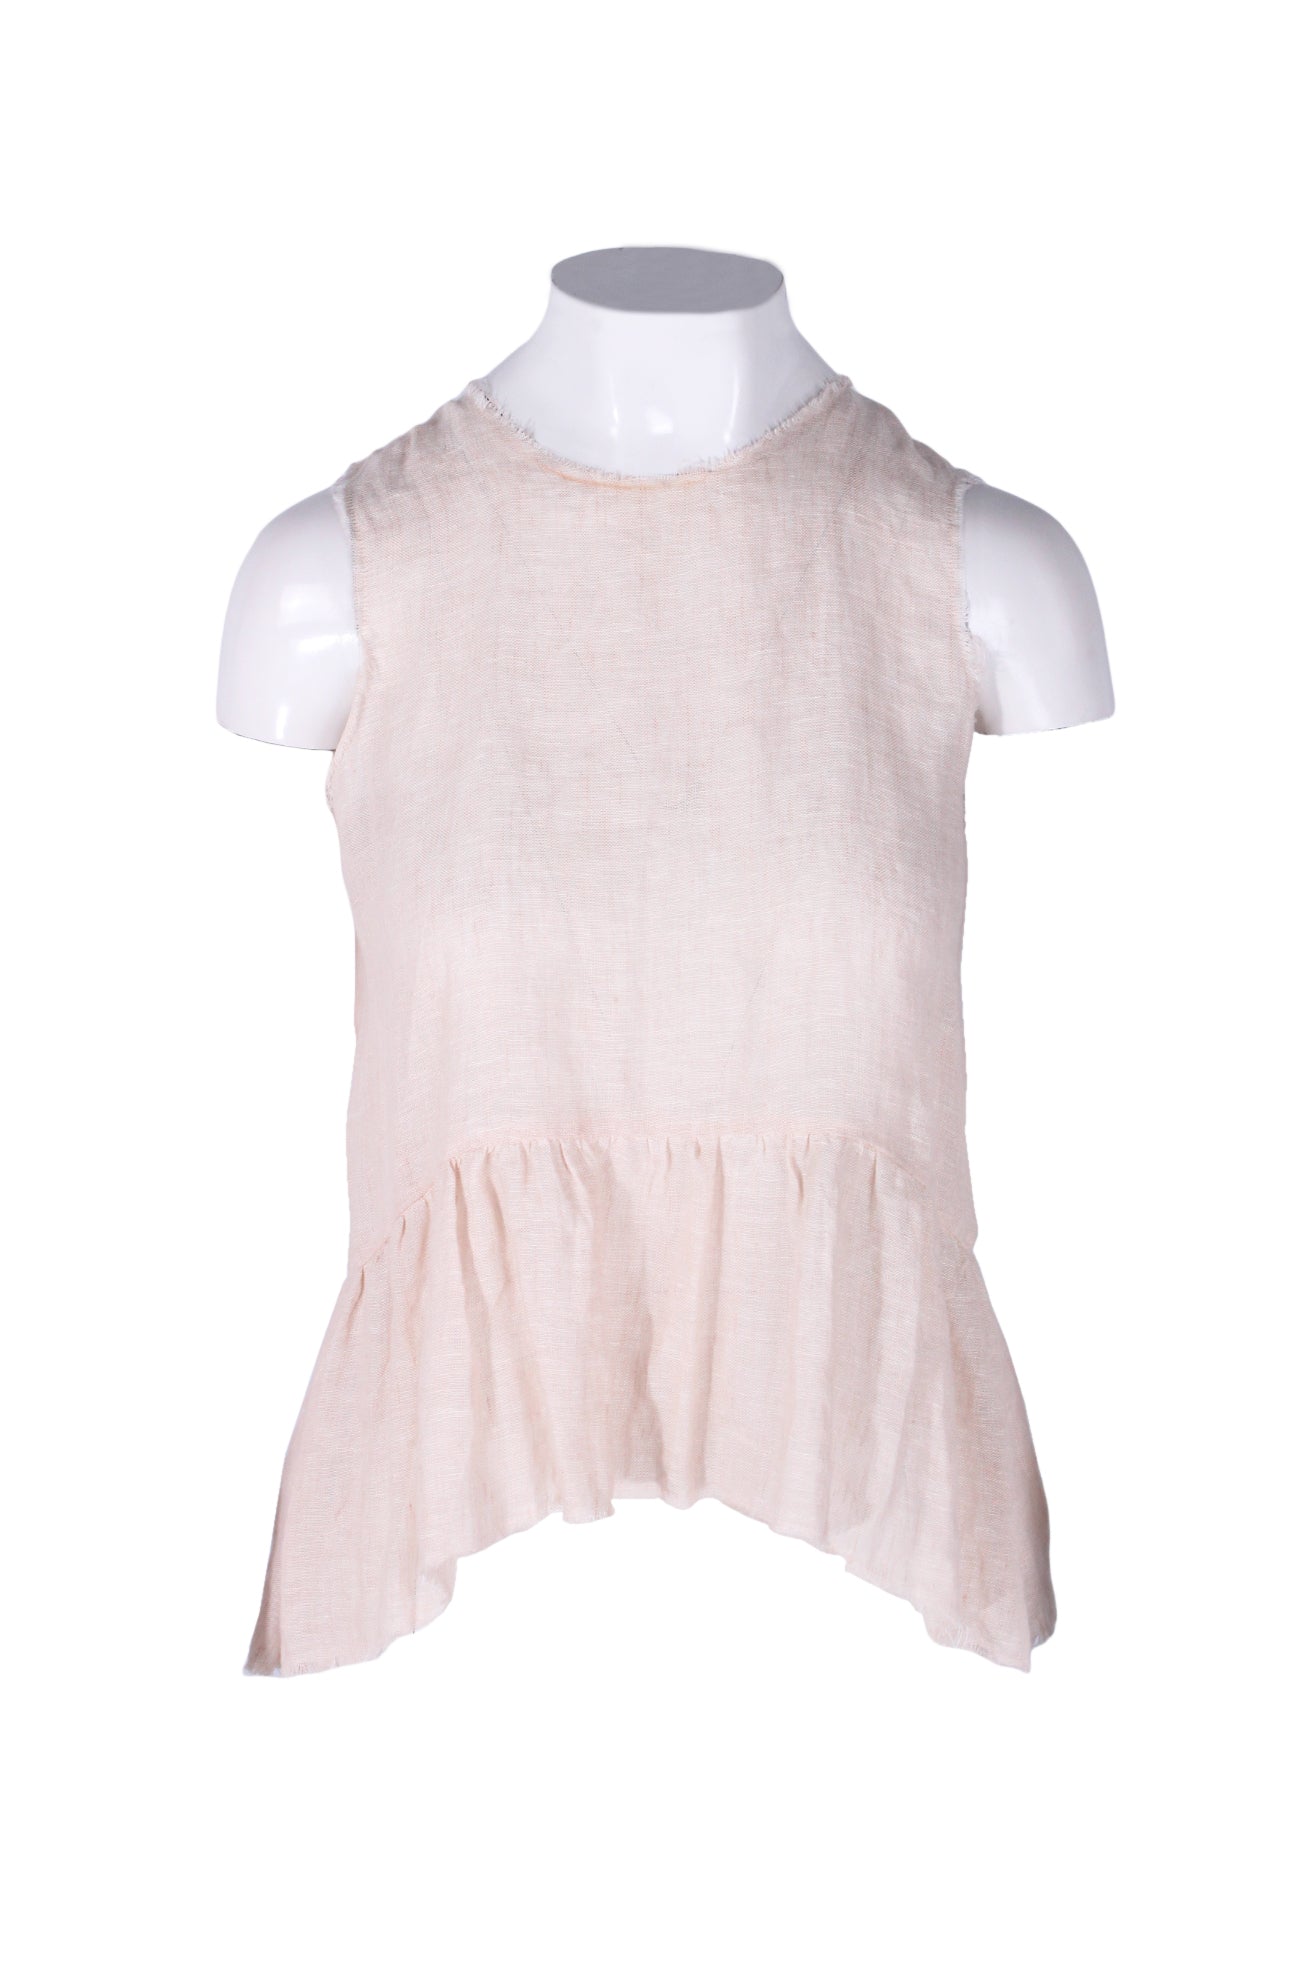 front angle shosh pale pink semi-sheer sleeveless linen top on feminine mannequin torso featuring frayed edging, gathered/high-low hem, and round neckline.